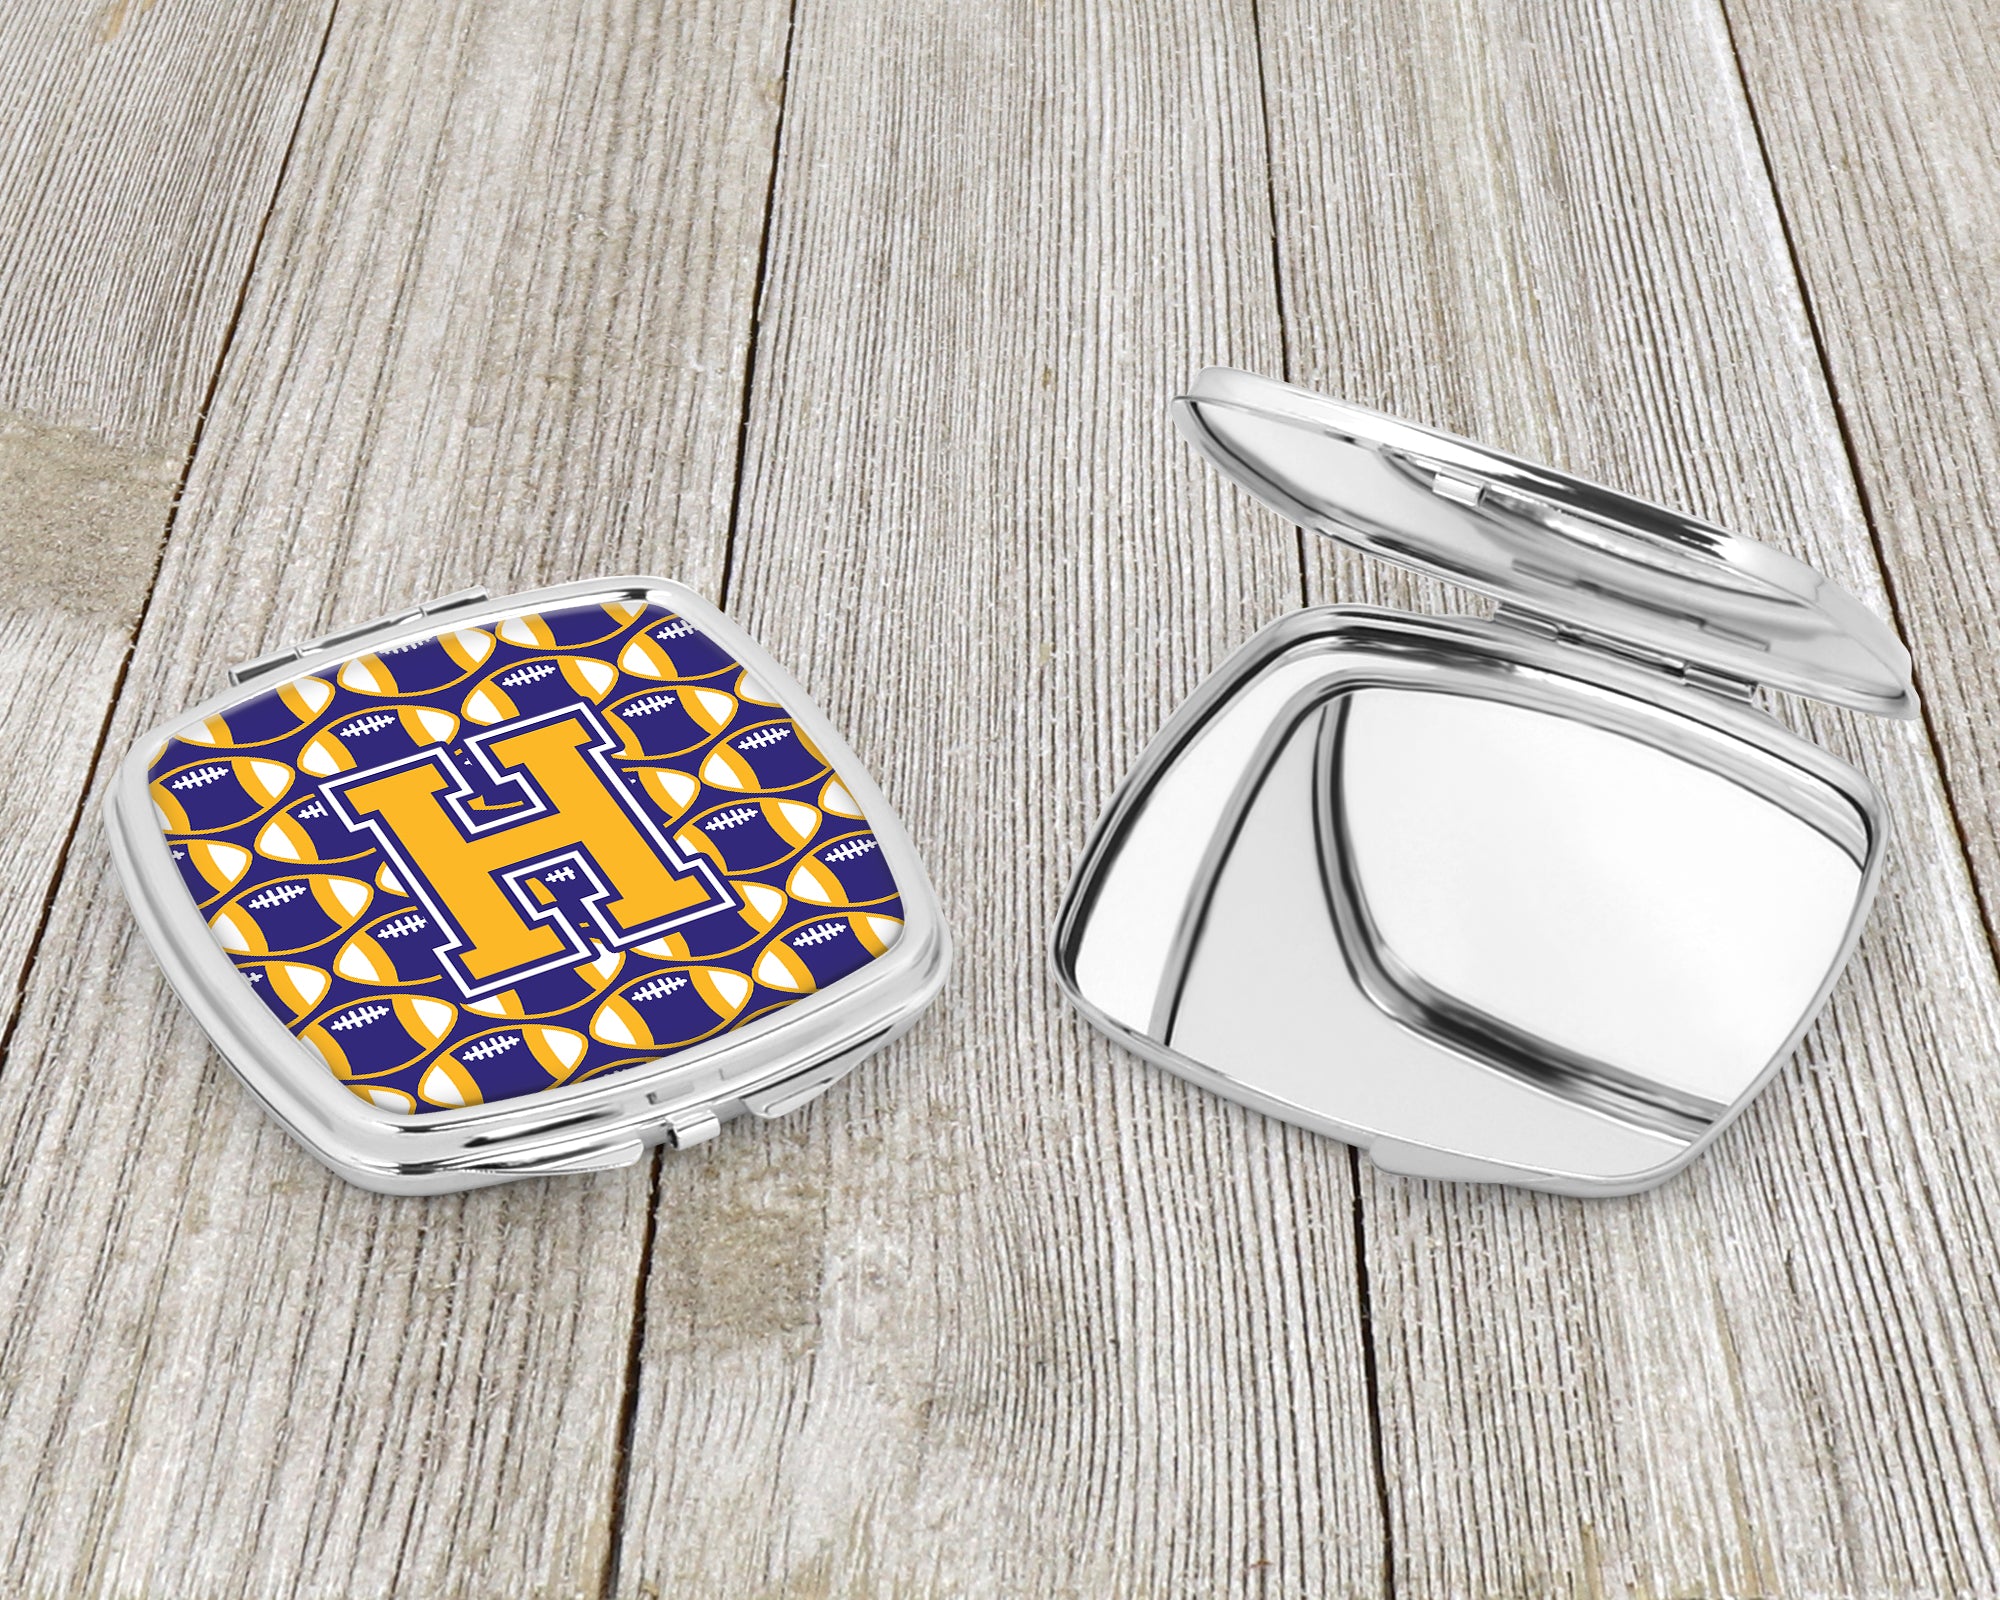 Letter H Football Purple and Gold Compact Mirror CJ1064-HSCM  the-store.com.